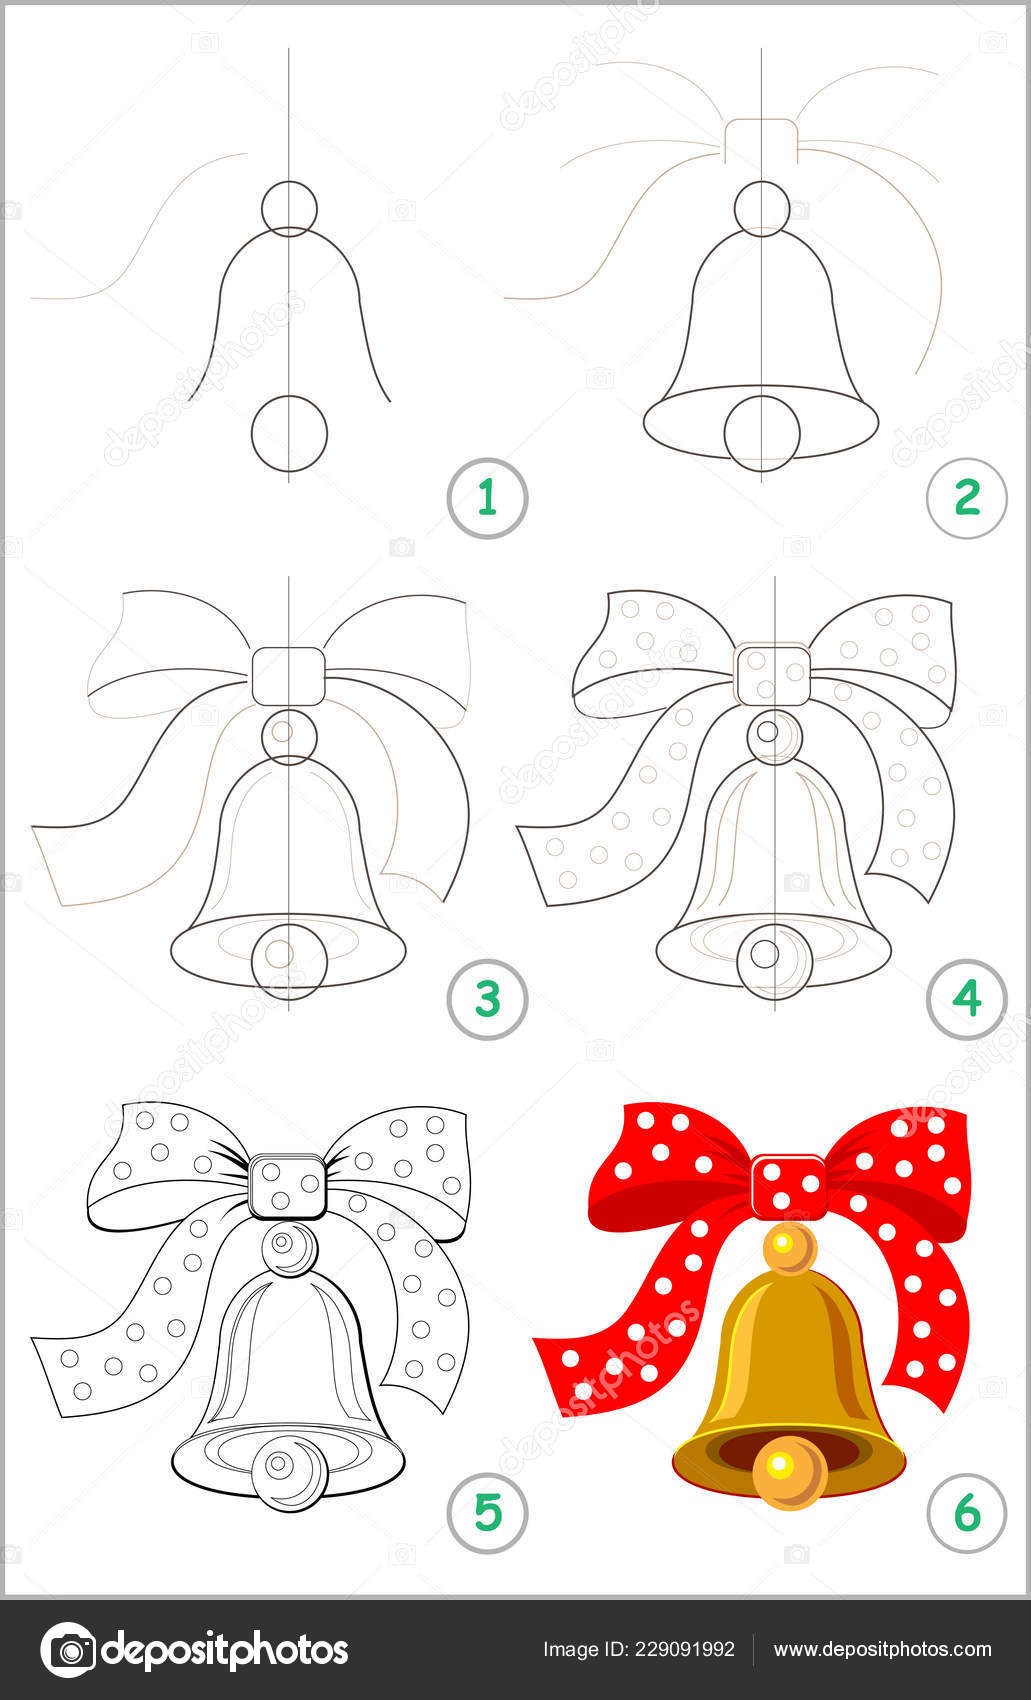 how-to-draw-a-cute-bow-step-by-step-page-shows-how-learn-step-step